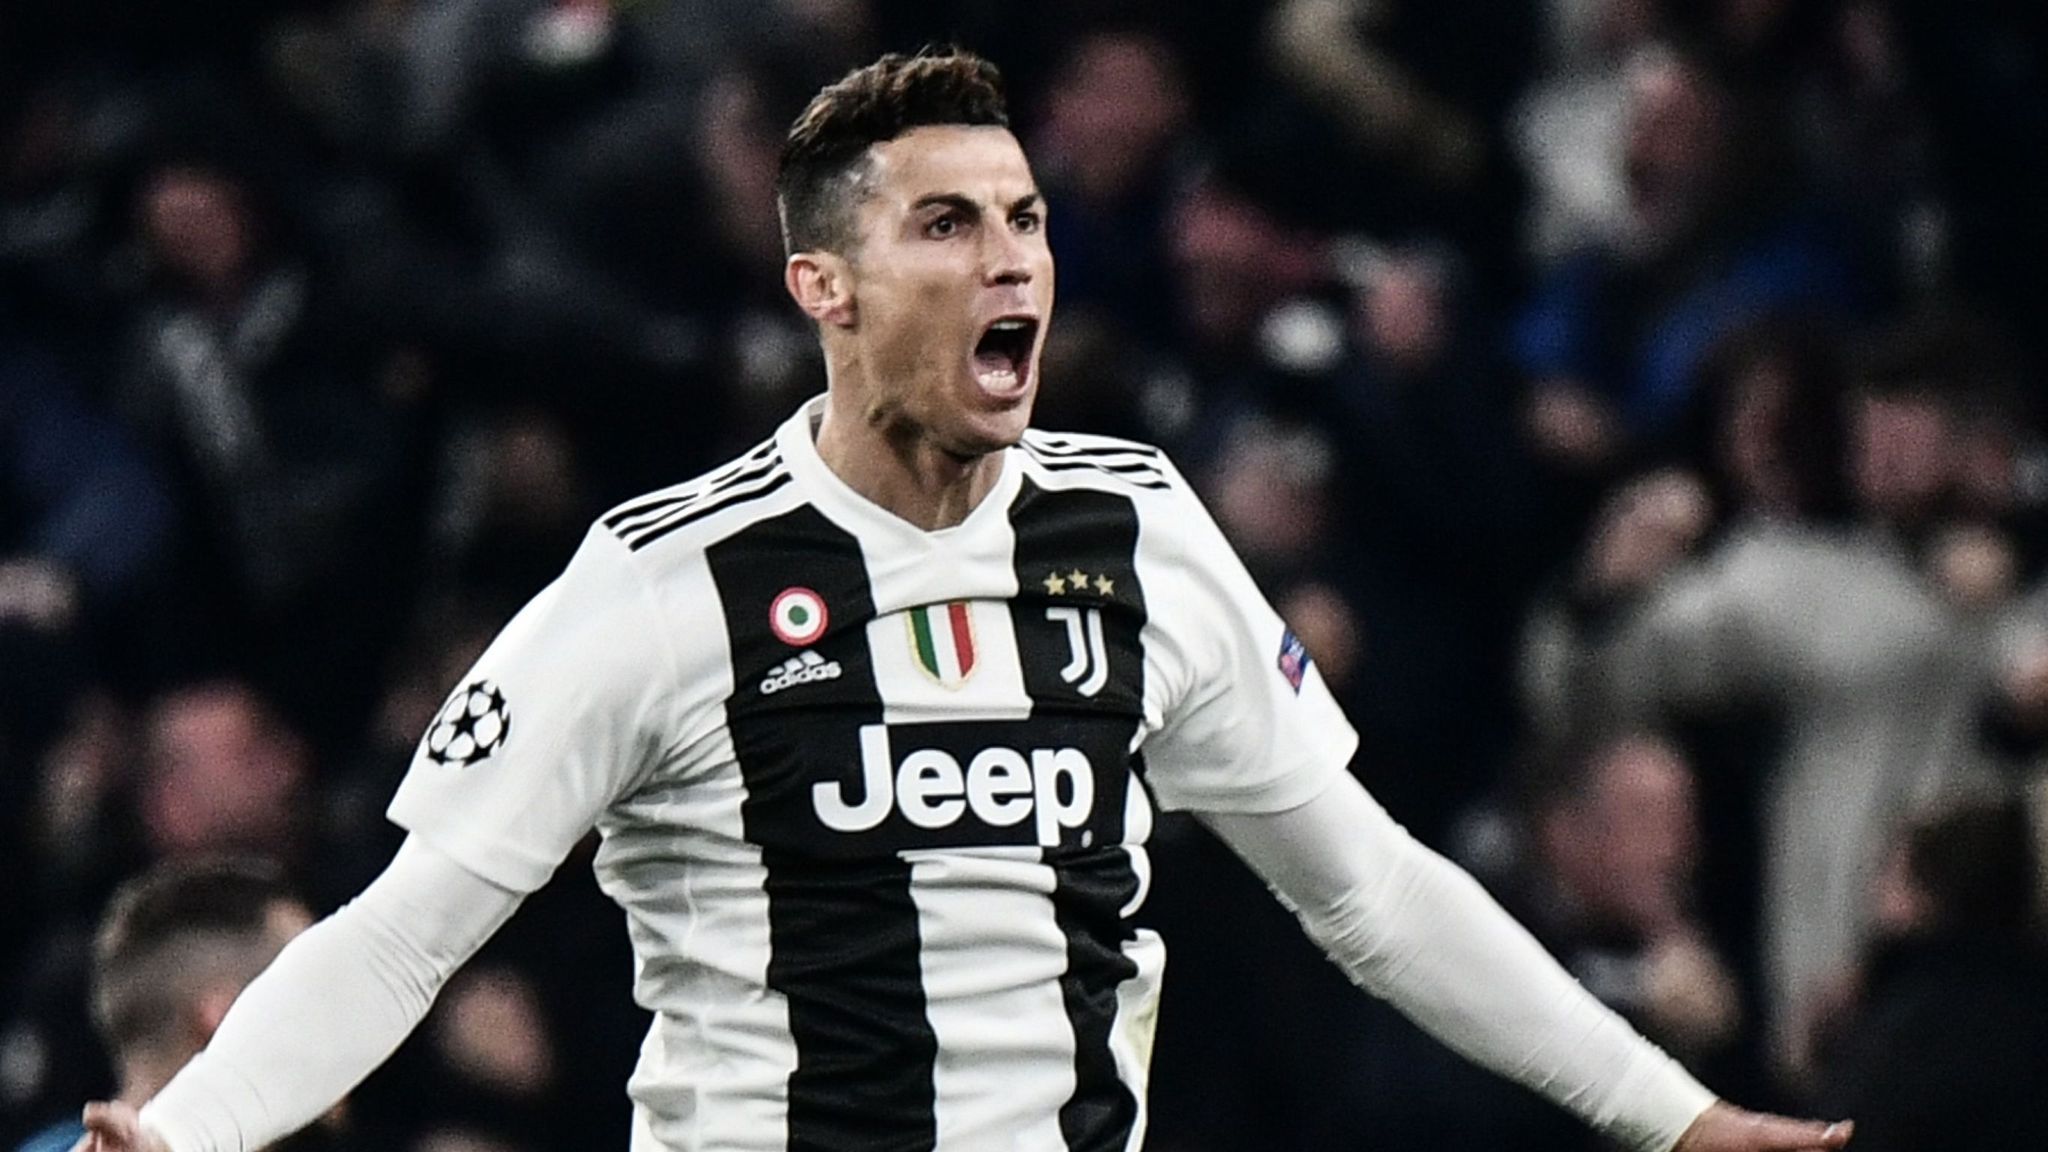 Ronaldo tops Messi with 2 goals in Juve's 3-0 win at Barca - The